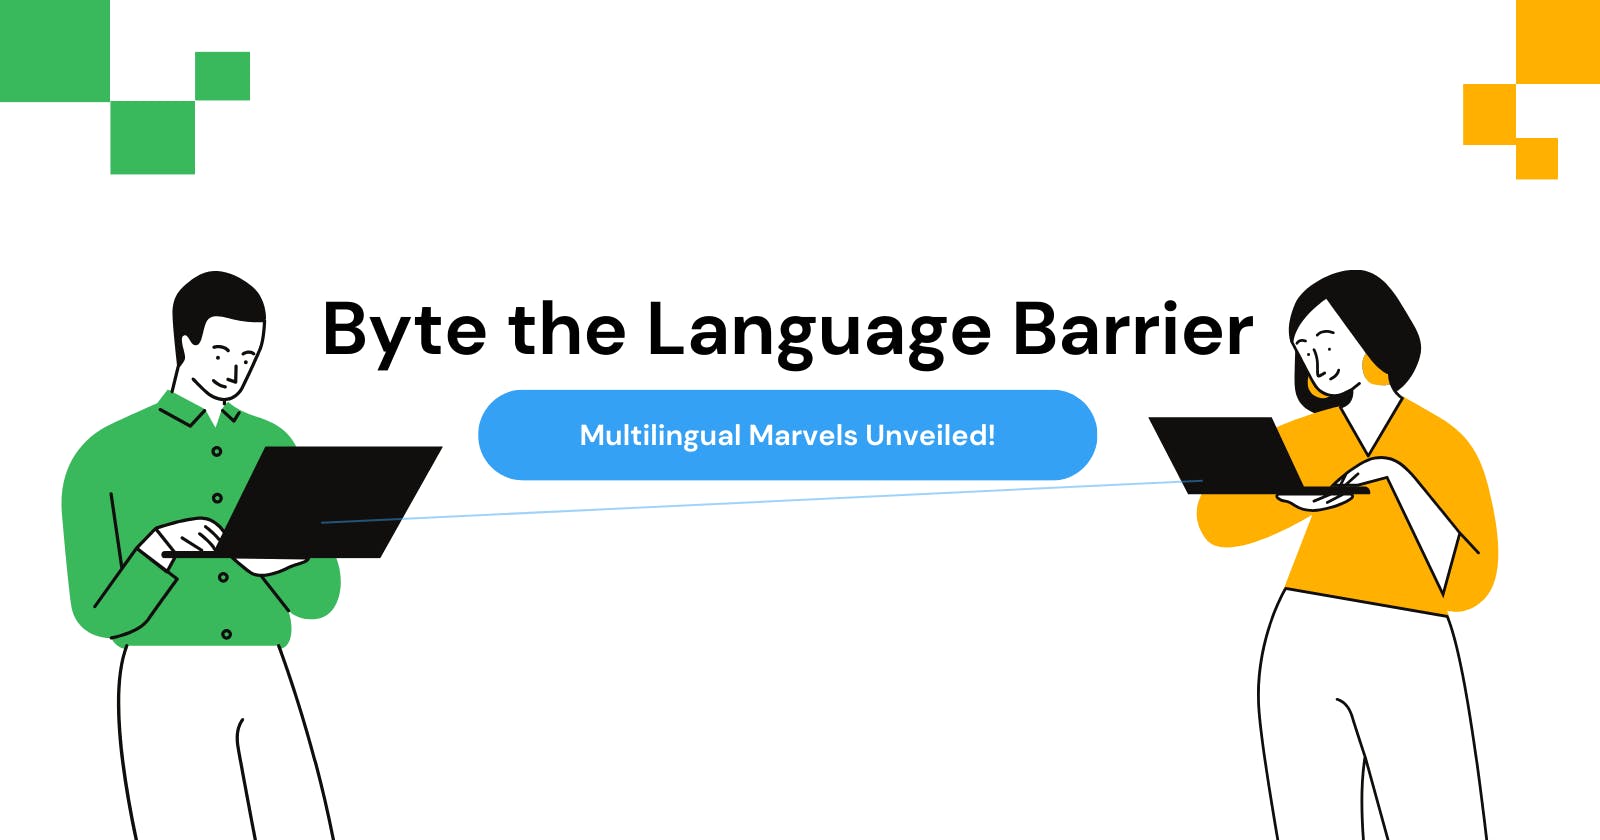 Byte the Language Barrier: Multilingual Marvels Unveiled!